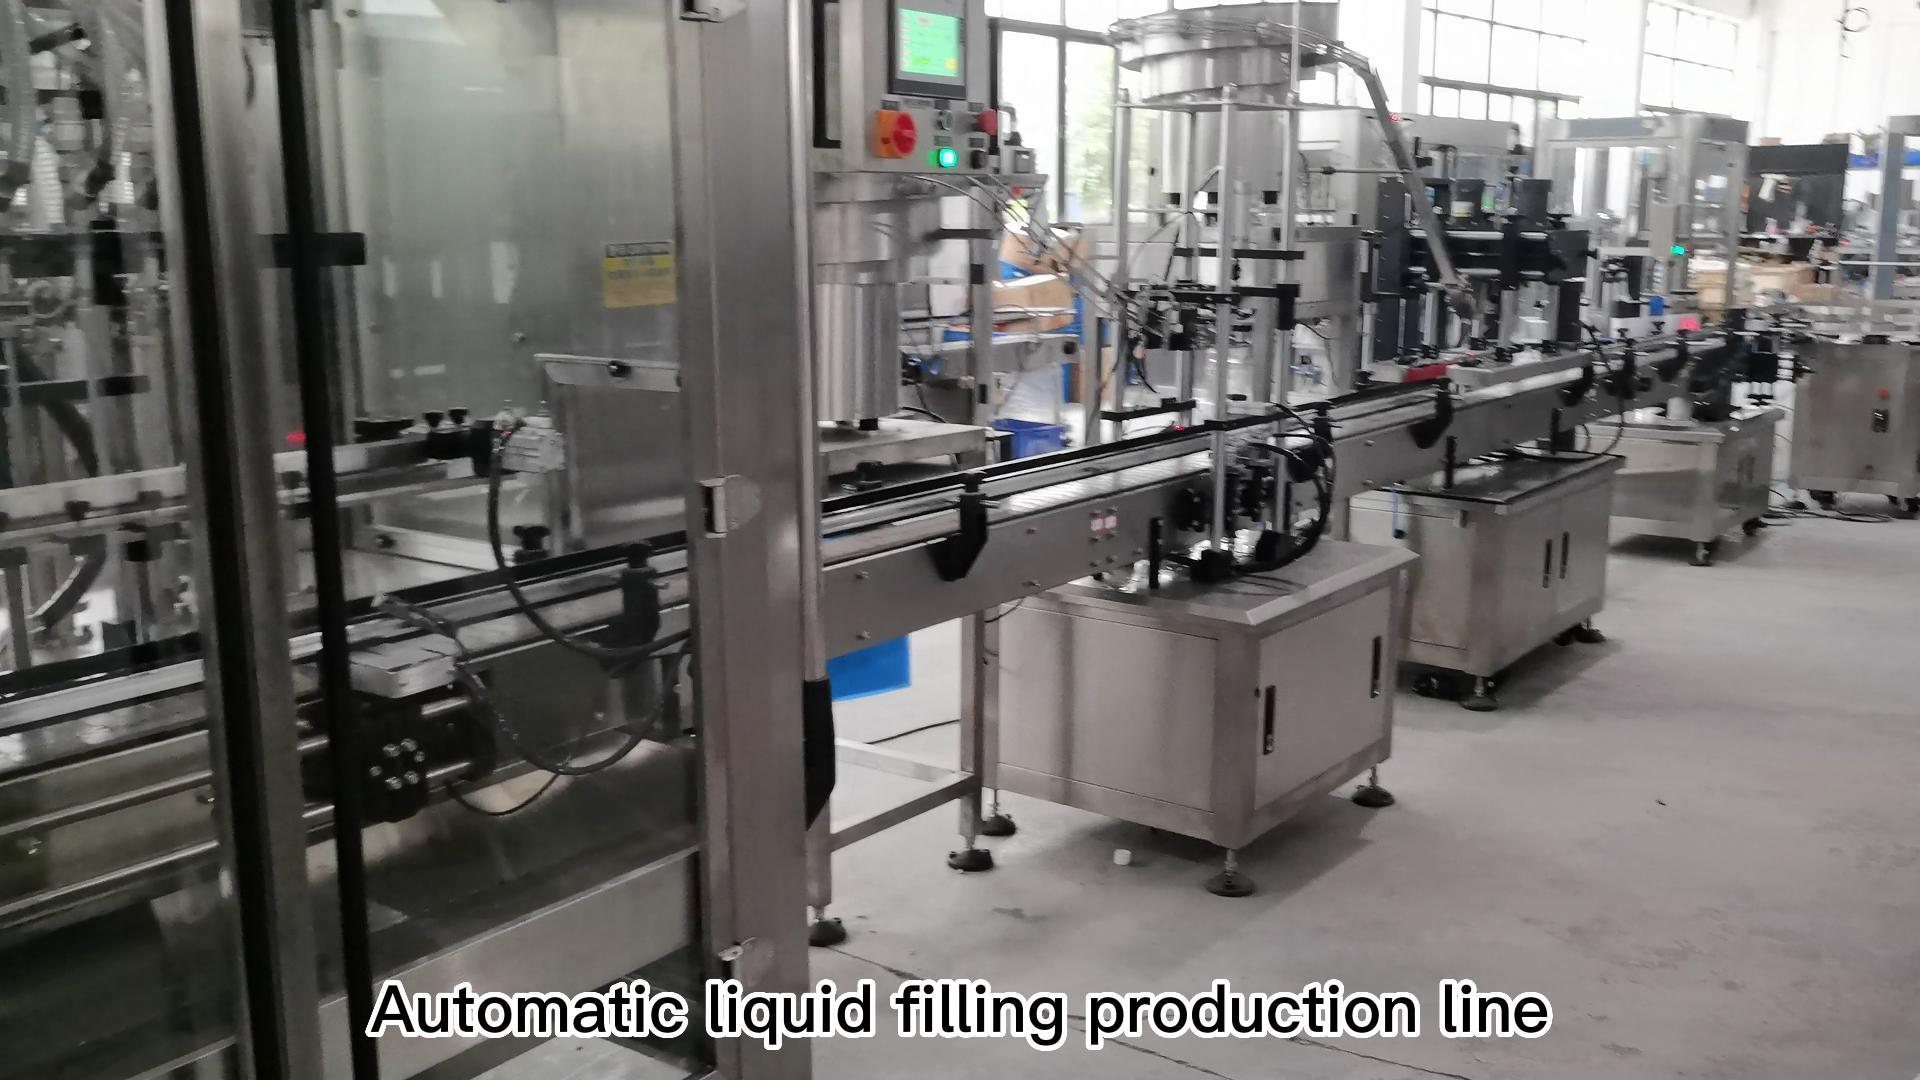 The first test of liquid filling production line